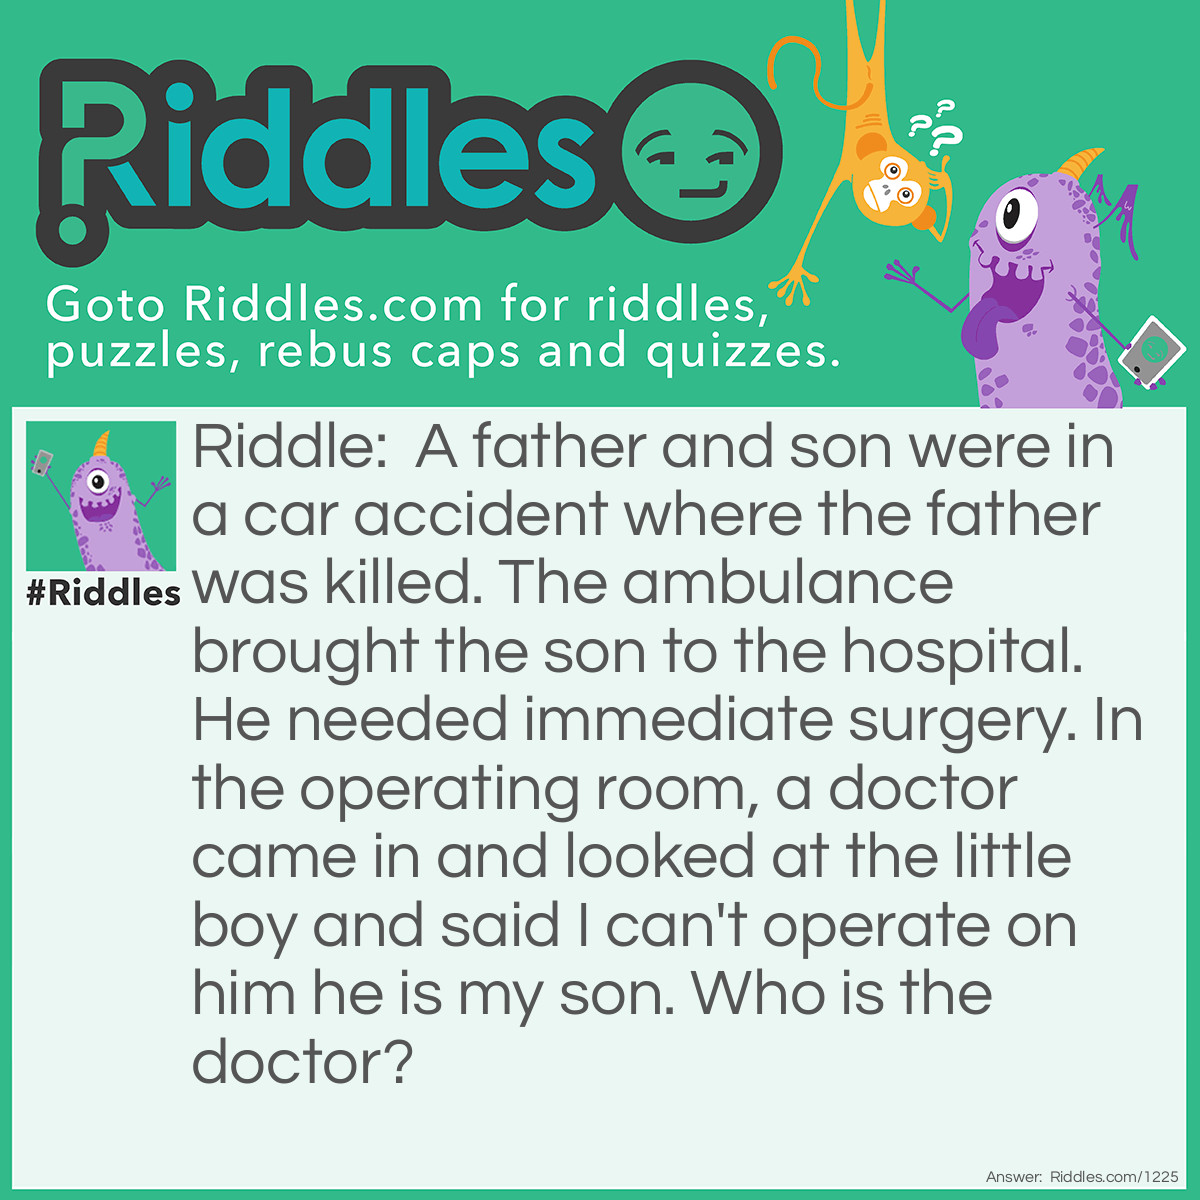 Riddle: A father and son were in a car accident where the father was killed. The ambulance brought the son to the hospital. He needed immediate surgery. In the operating room, a doctor came in and looked at the little boy and said I can't operate on him he is my son.
Who is the doctor? Answer: The Mother.